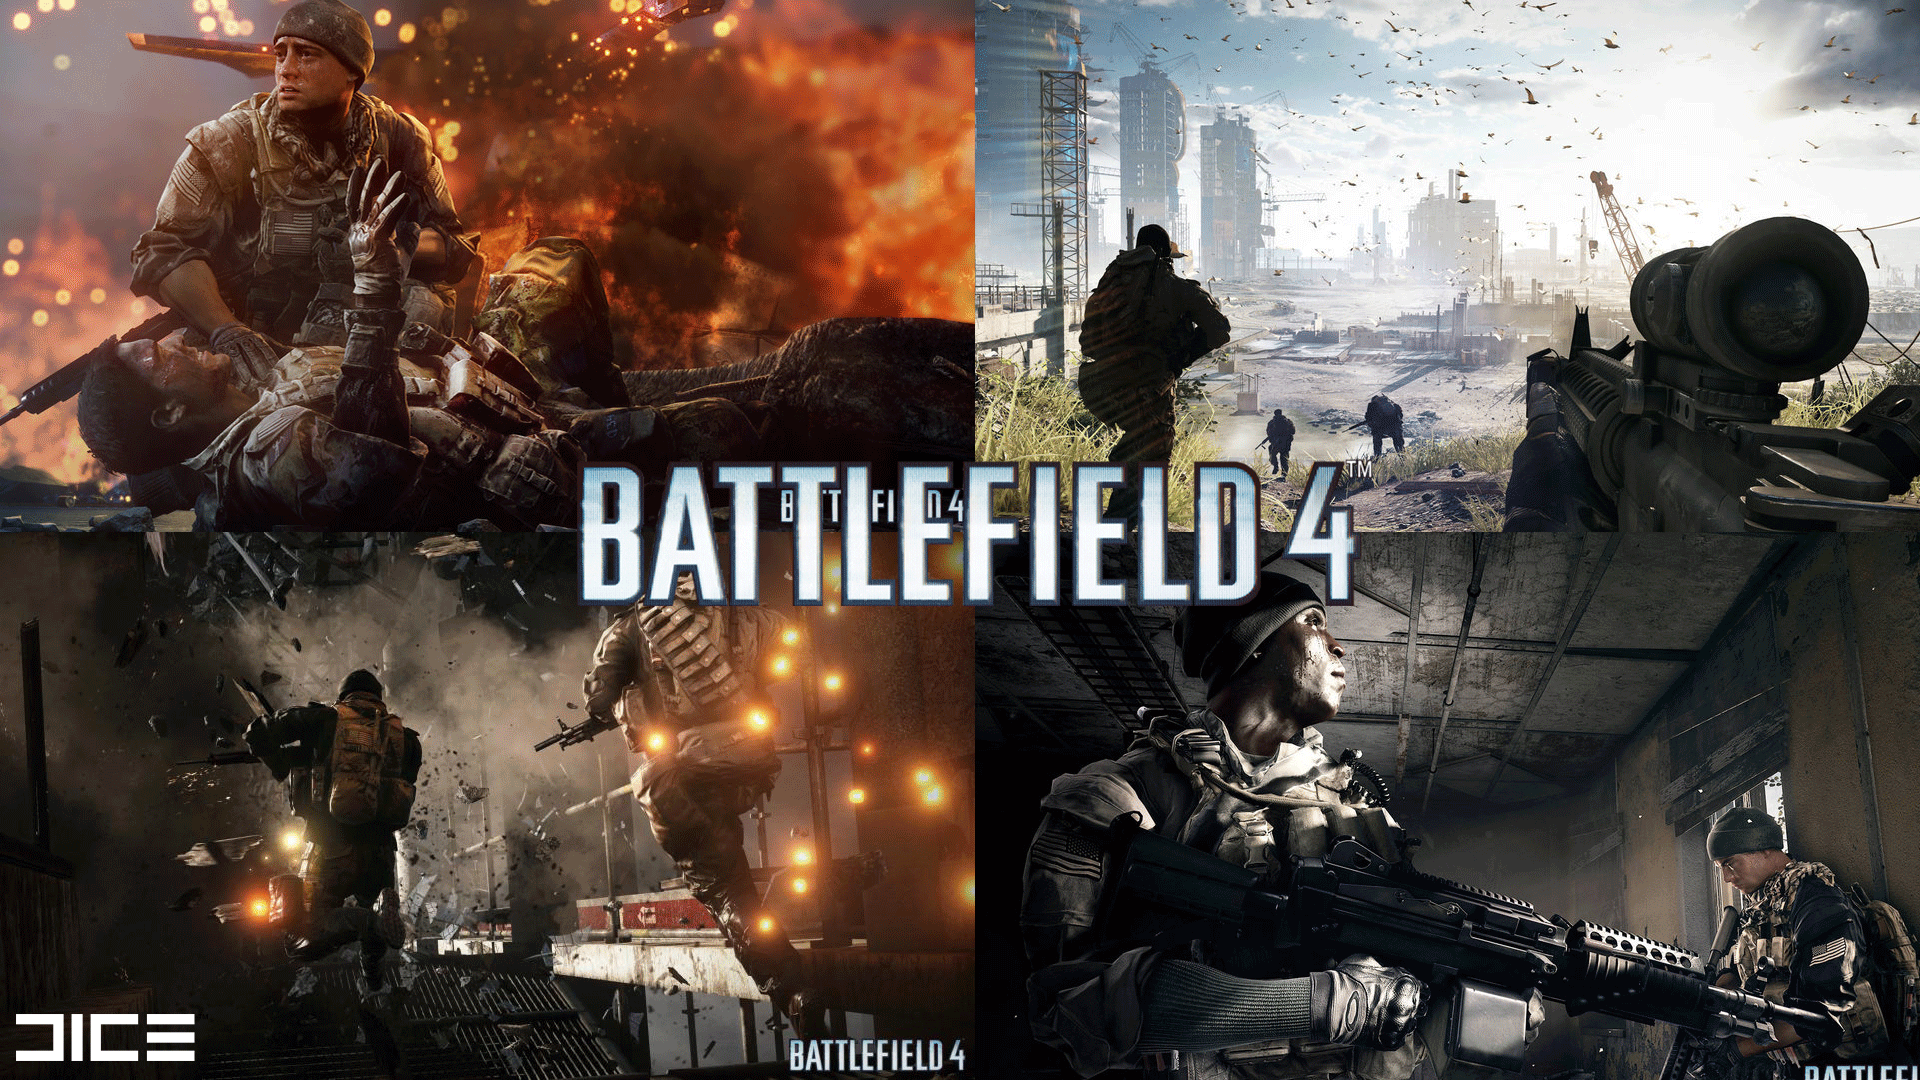 BATTLEFIELD 4 Collage Wallpaper 1080p The GET SOME Academy